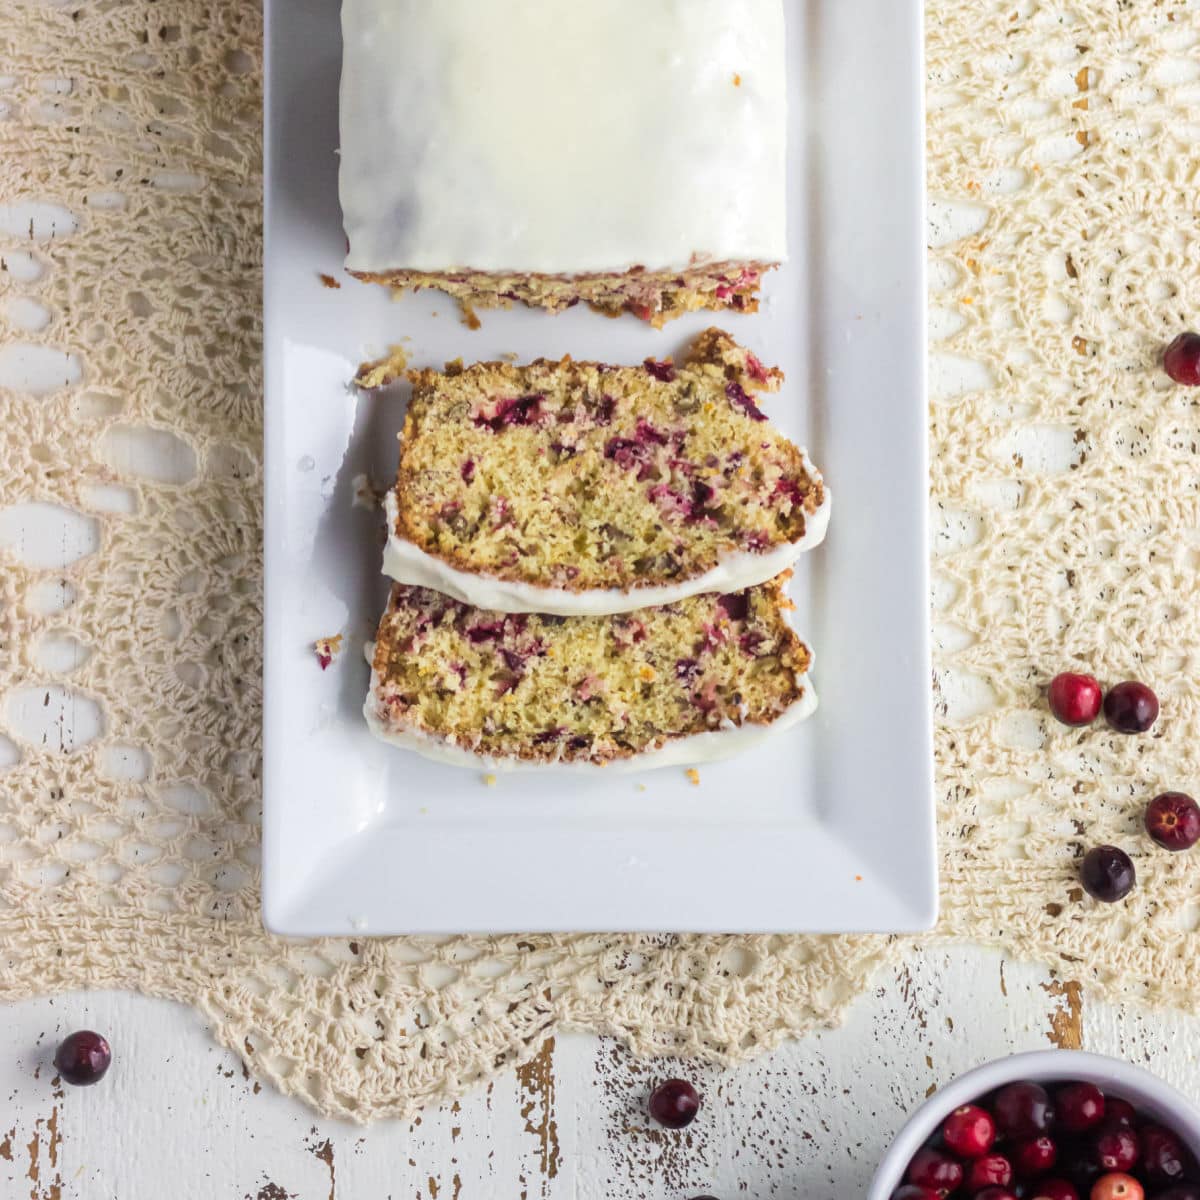 Overhead view of the cranberry nut bread